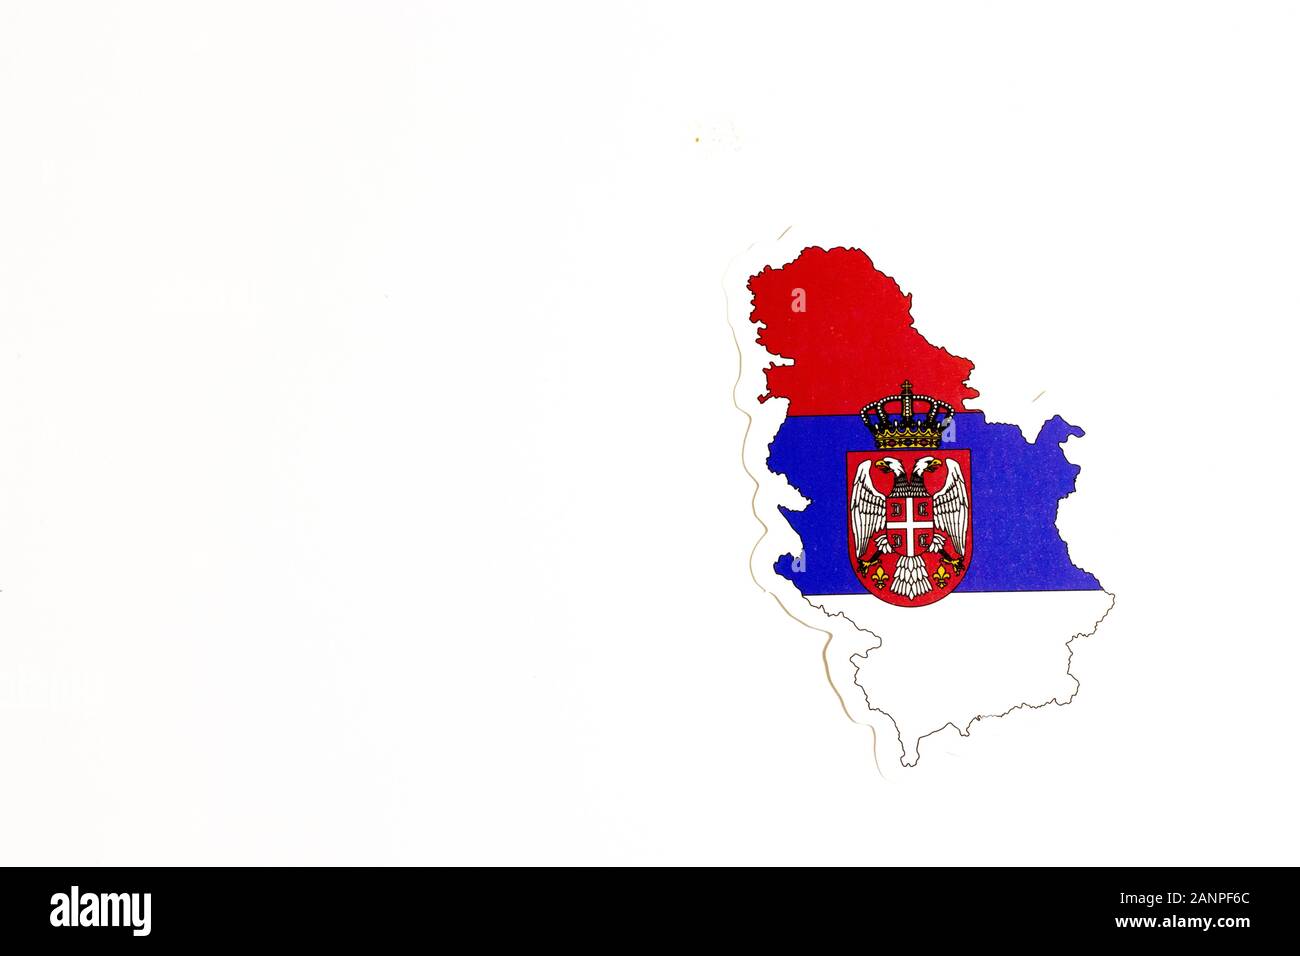 Los Angeles, California, USA - 17 January 2020: National flag of Serbia. Country outline on white background with copy space. Politics illustration Stock Photo